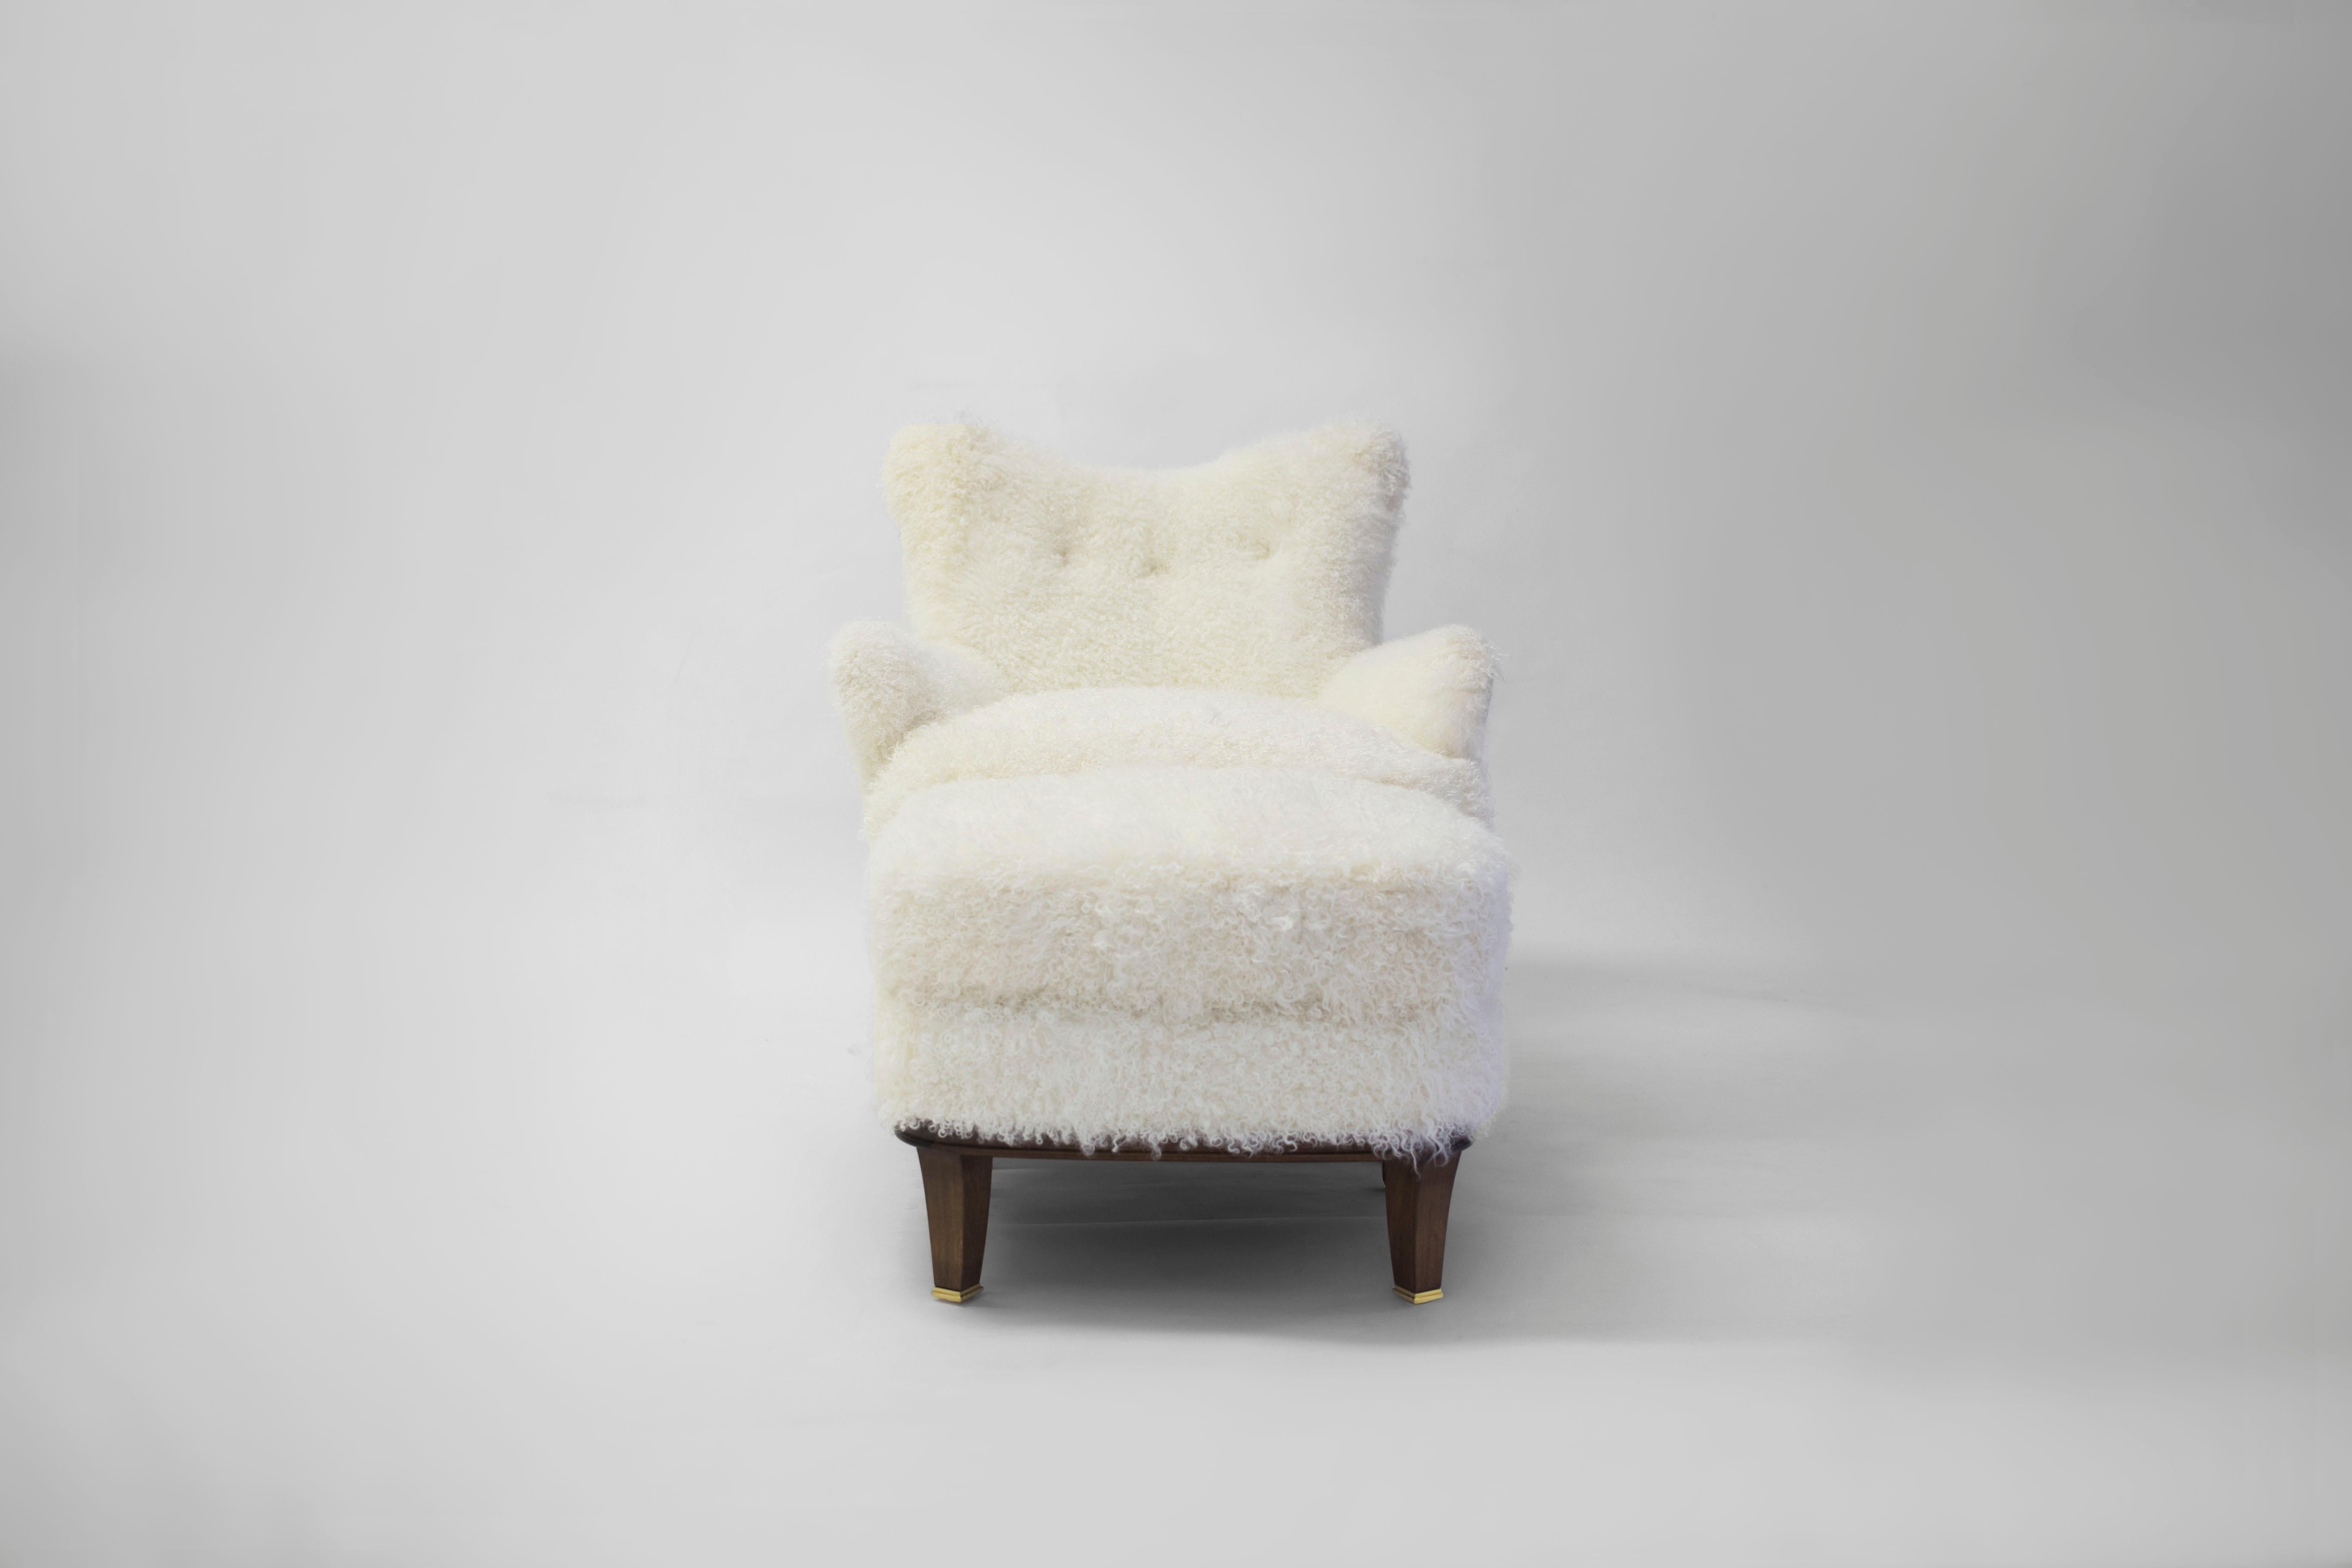 Contemporary Shearling Covered Shaped Back Chair with Wood Base and Legs with Metal Cap Feet  For Sale